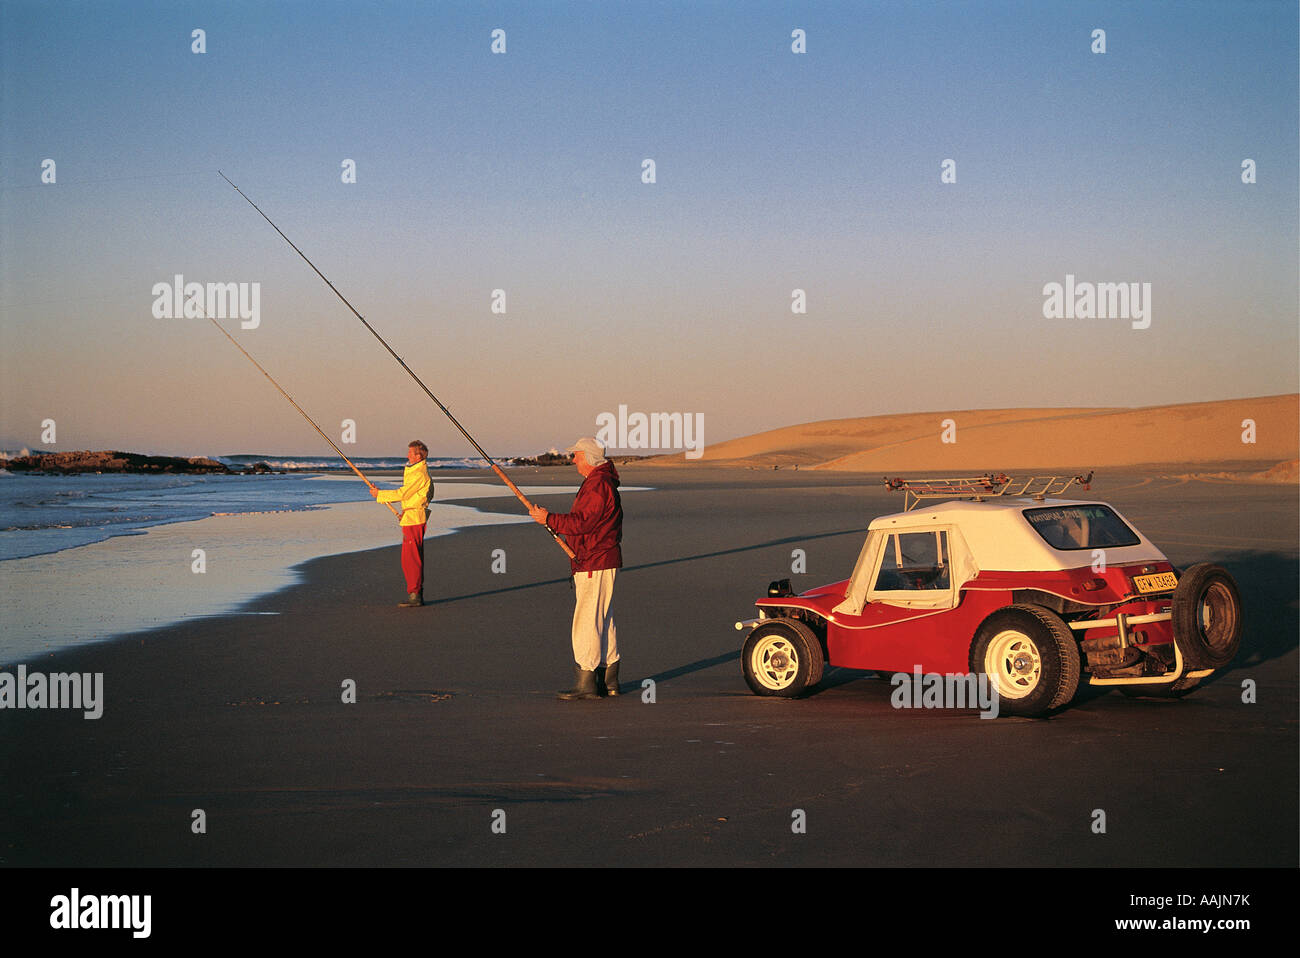 Two anlgers Rod Fishing at Kaizer Beach near East London Eastern Cape South Africa A red beach buggy car is parked close by Stock Photo